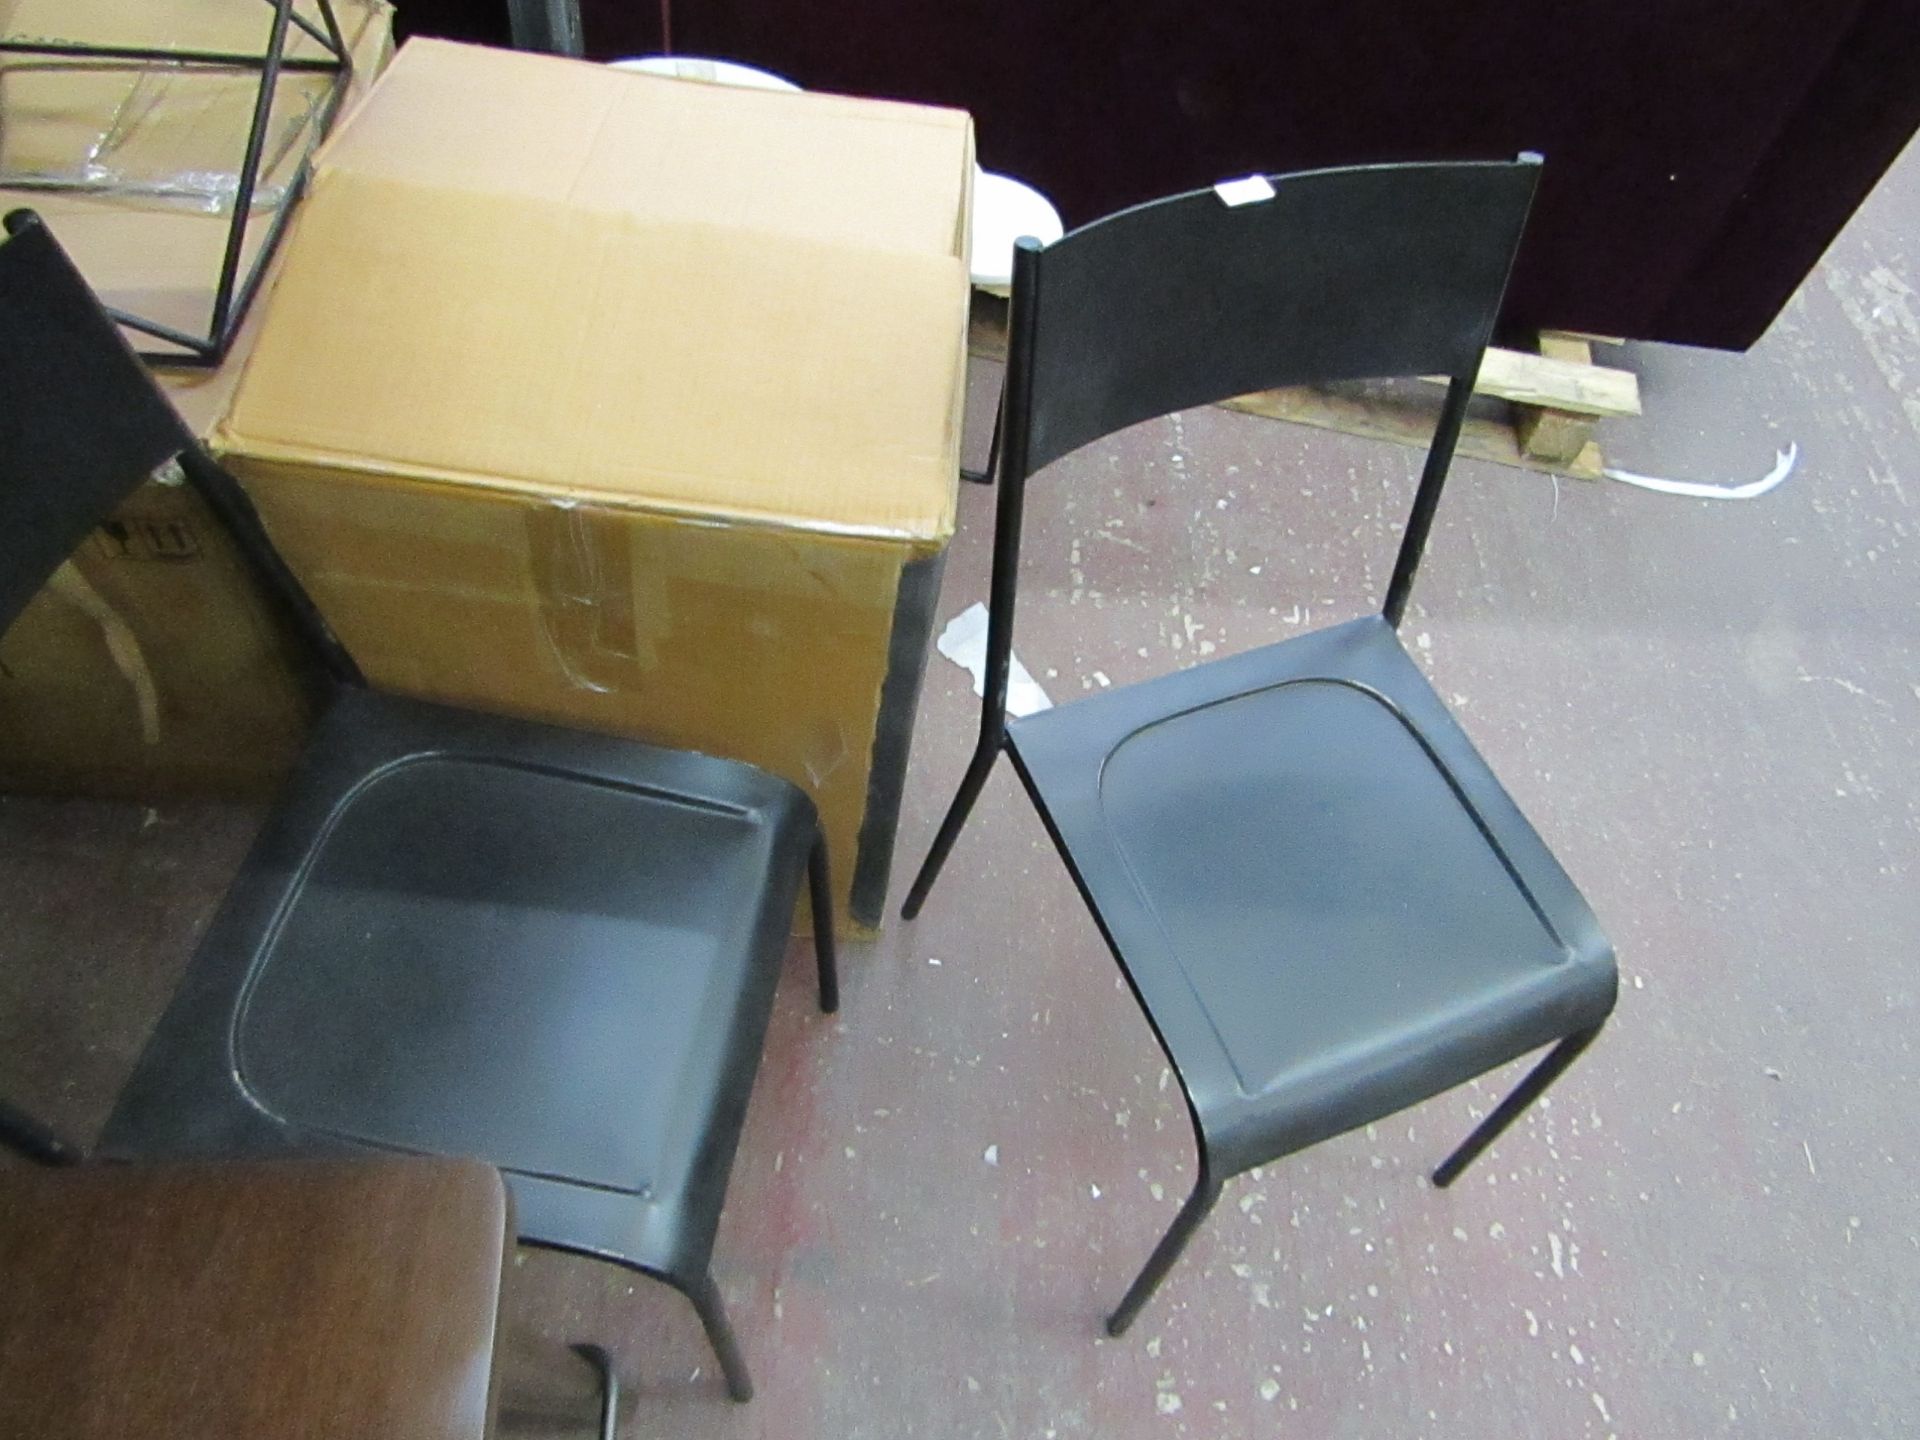 Swoon set of 2 Buckley metal dining chairs in Black, with box, RRP £199, the chairs have sme surface